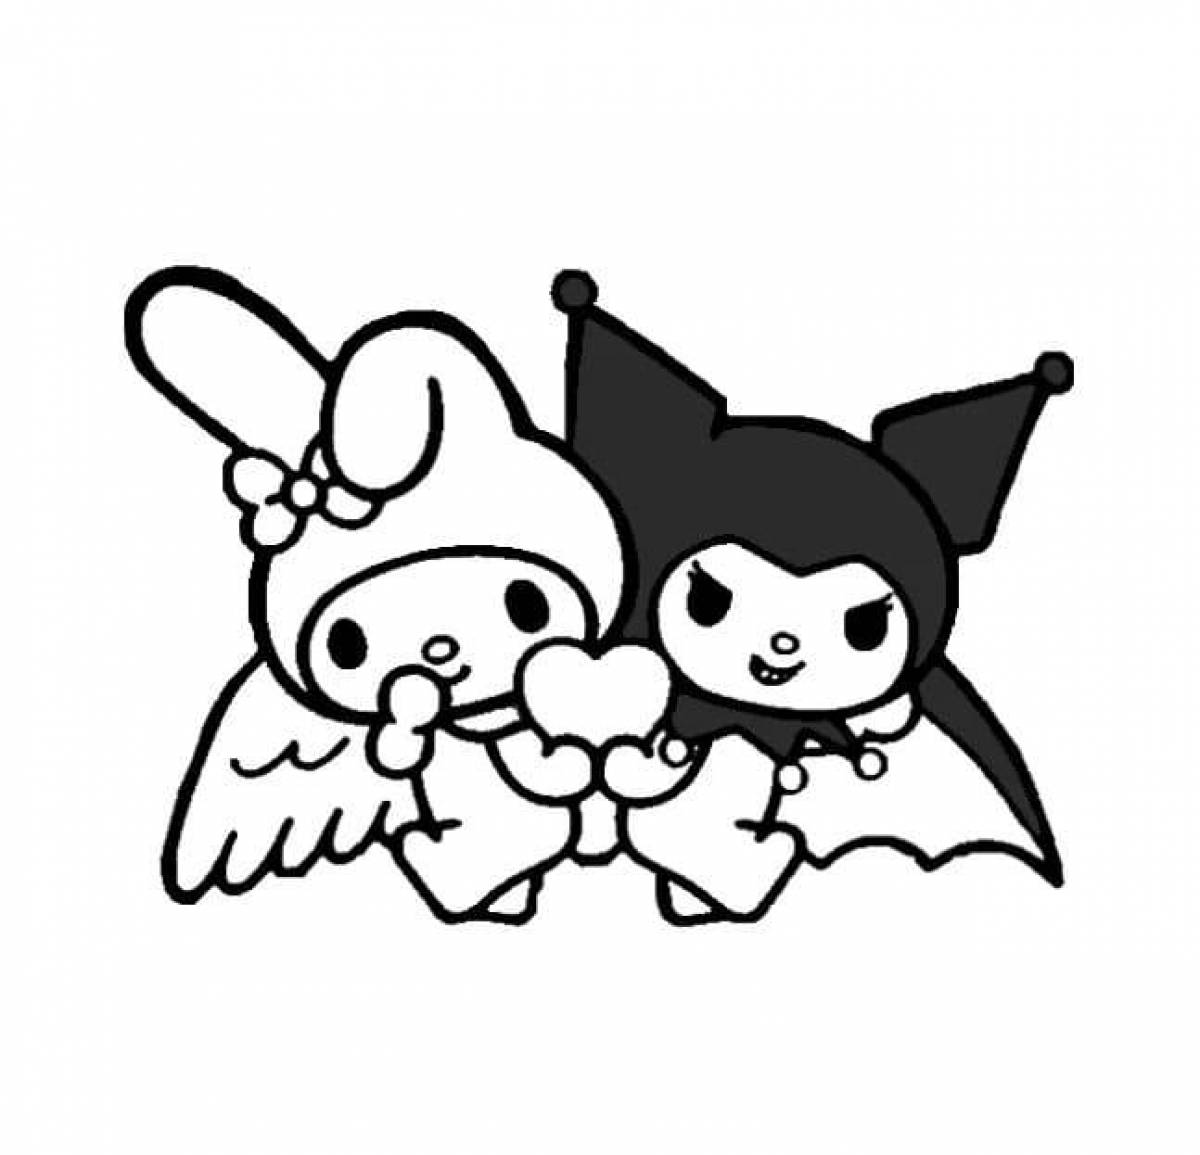 Bright kuromi and mai melody coloring book